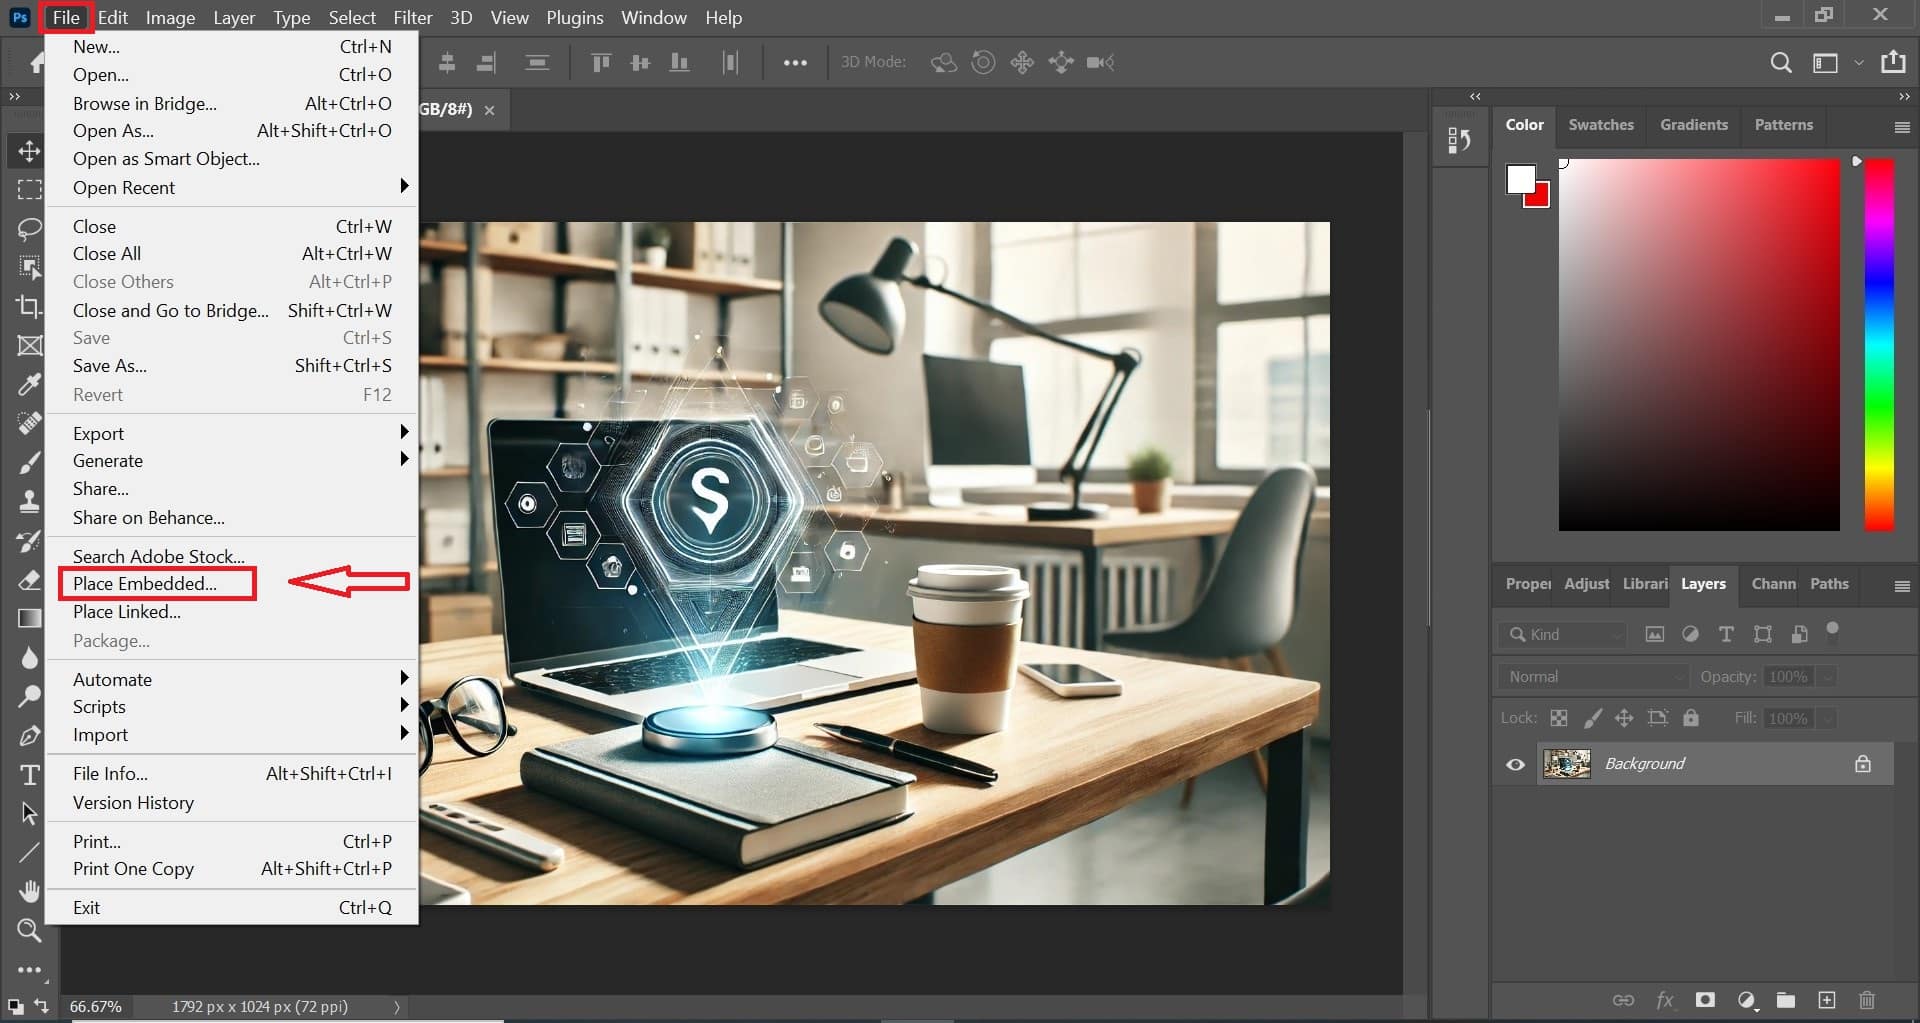 Adobe Photoshop interface showing the process of placing embedded smart objects. The File menu is open with the 'Place Embedded' option highlighted. The workspace includes a modern office setup with a laptop, coffee cup, notebook, and glasses.